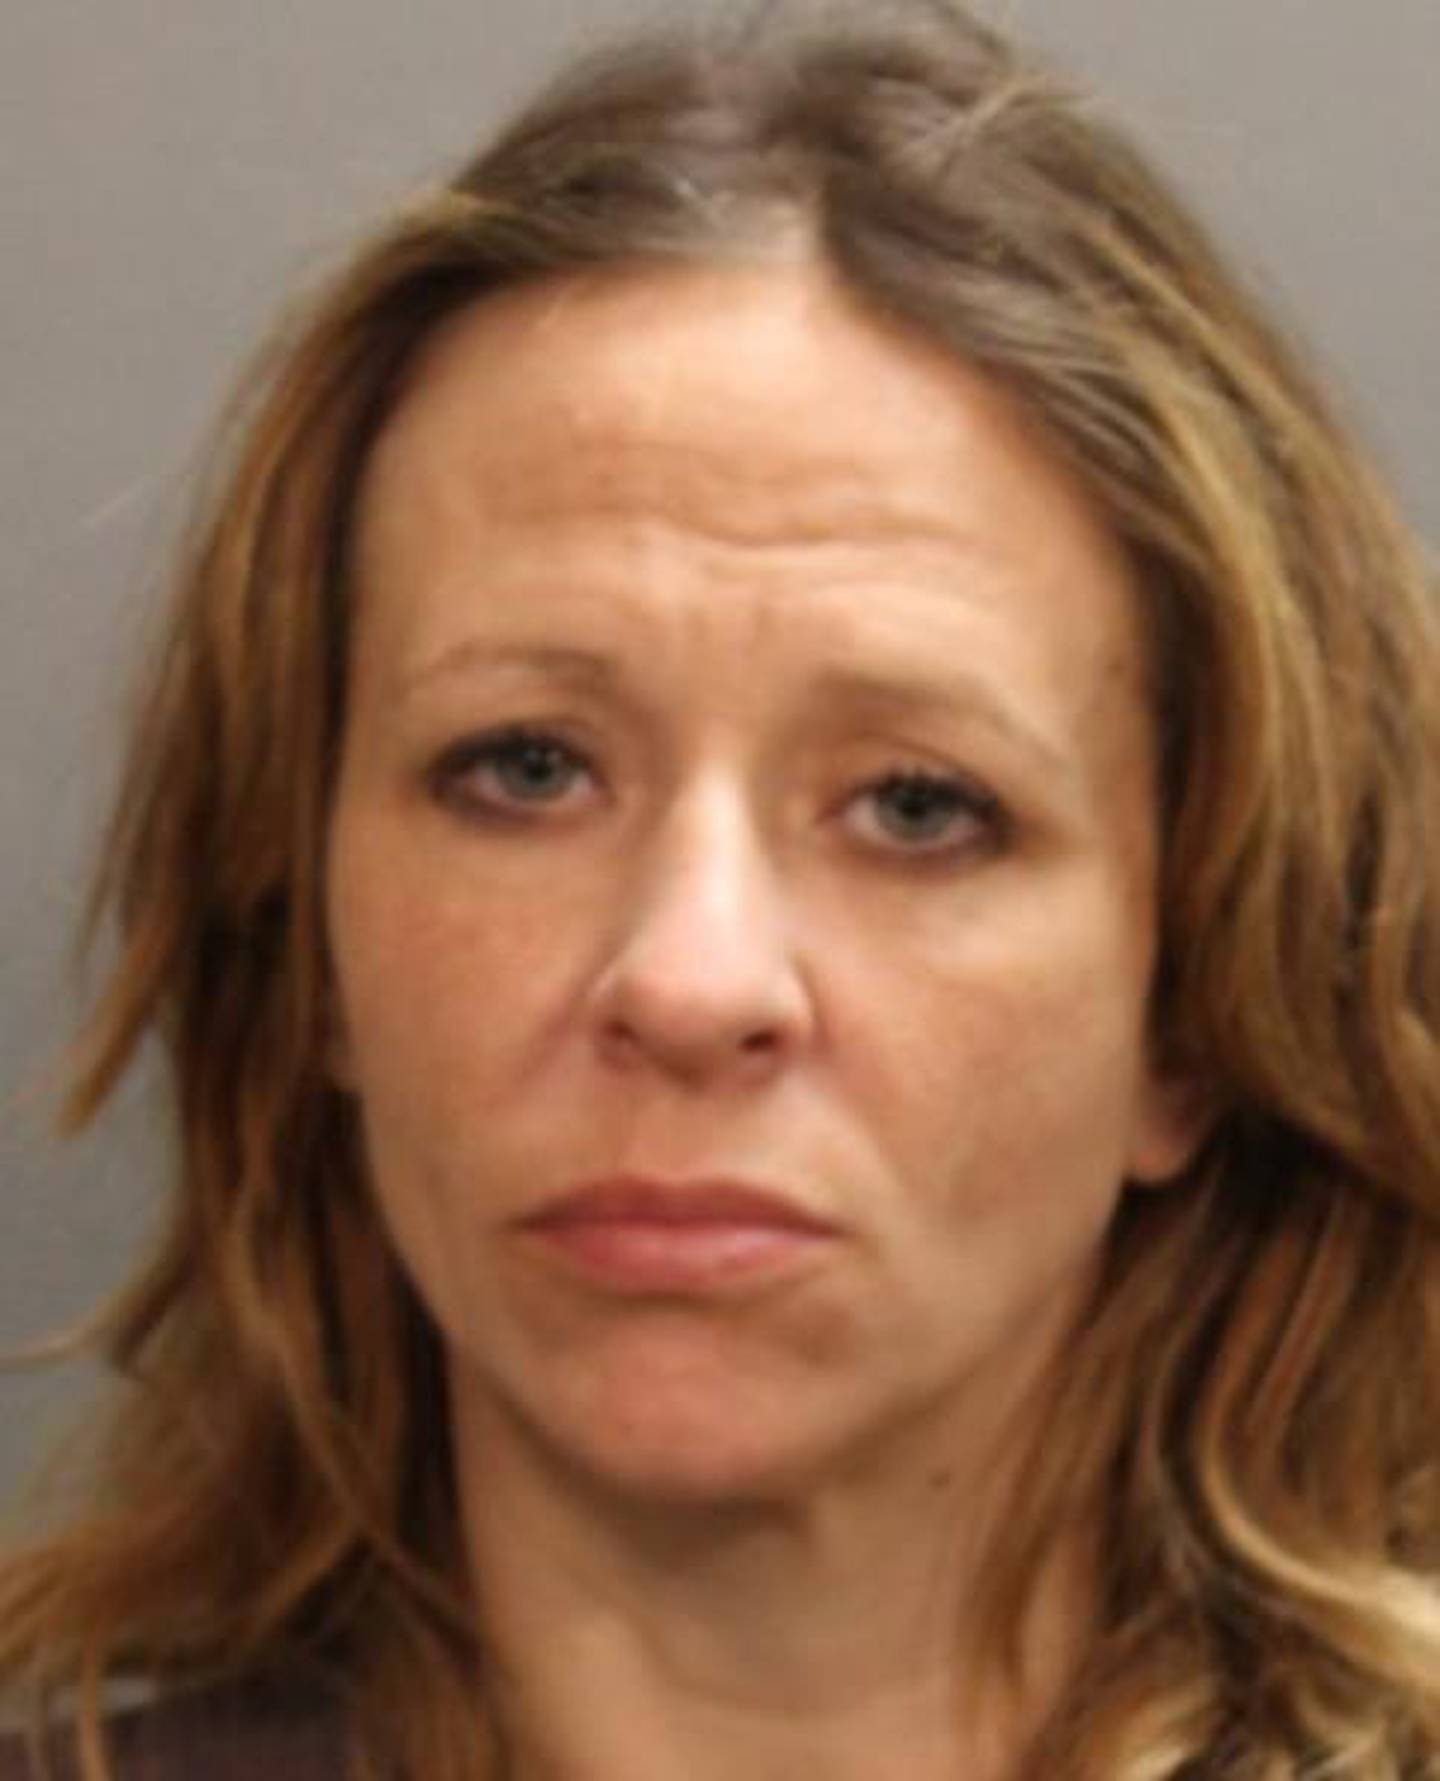 Brandy Poturich was arrested for three counts of controlled substance possession and one count of marijuana possession.